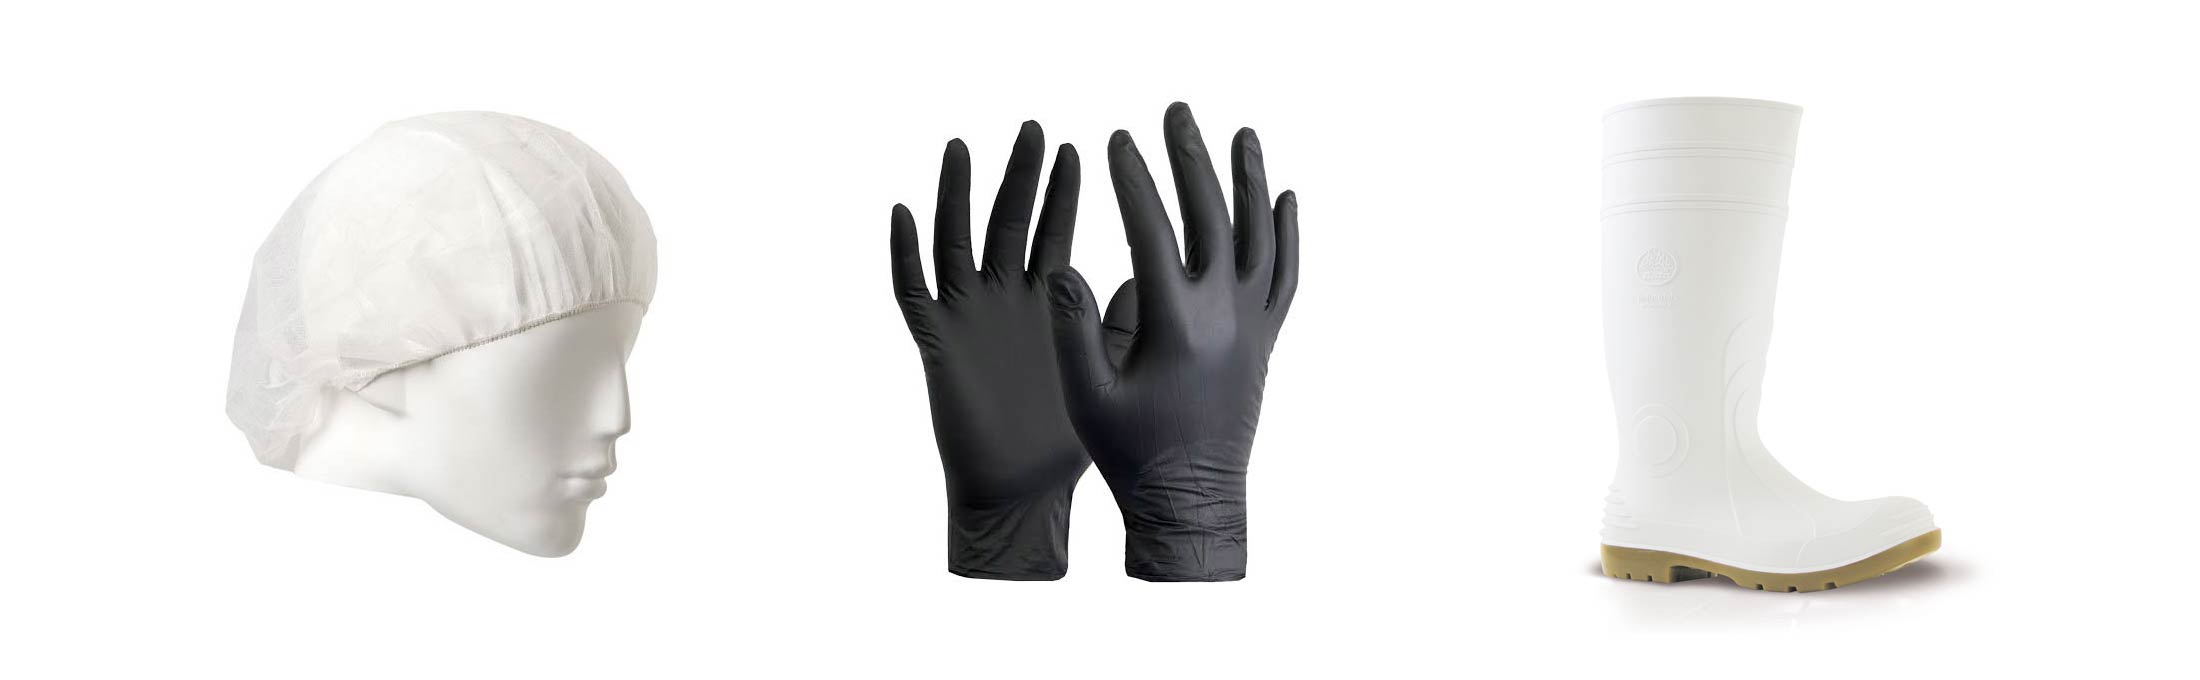 Complete Butcher Supplies stock a range of protective gear for butchers and meat processors.